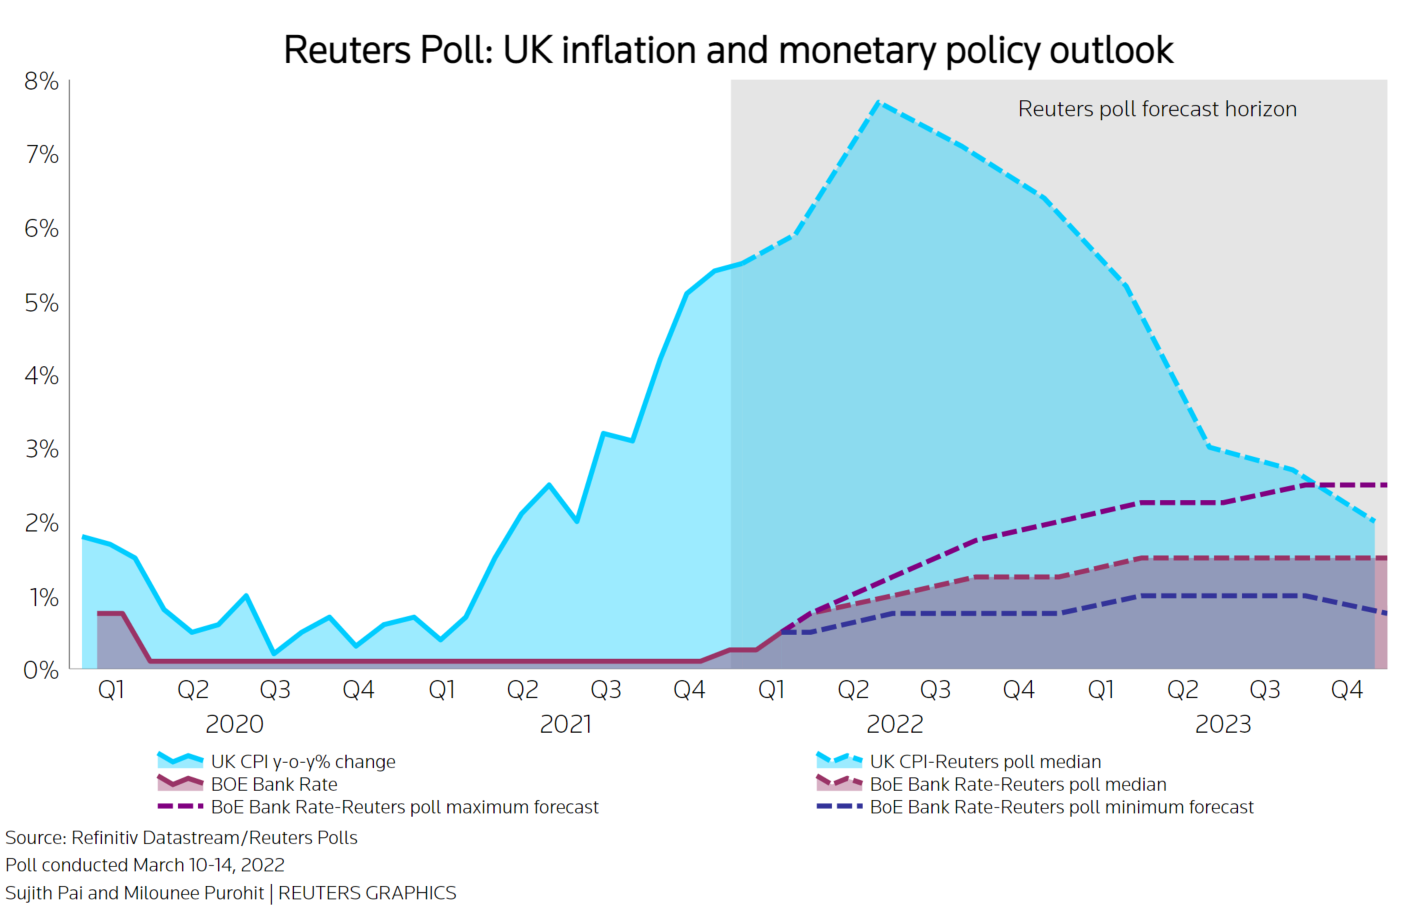 Reuters poll graphic on UK inflation and interest rates